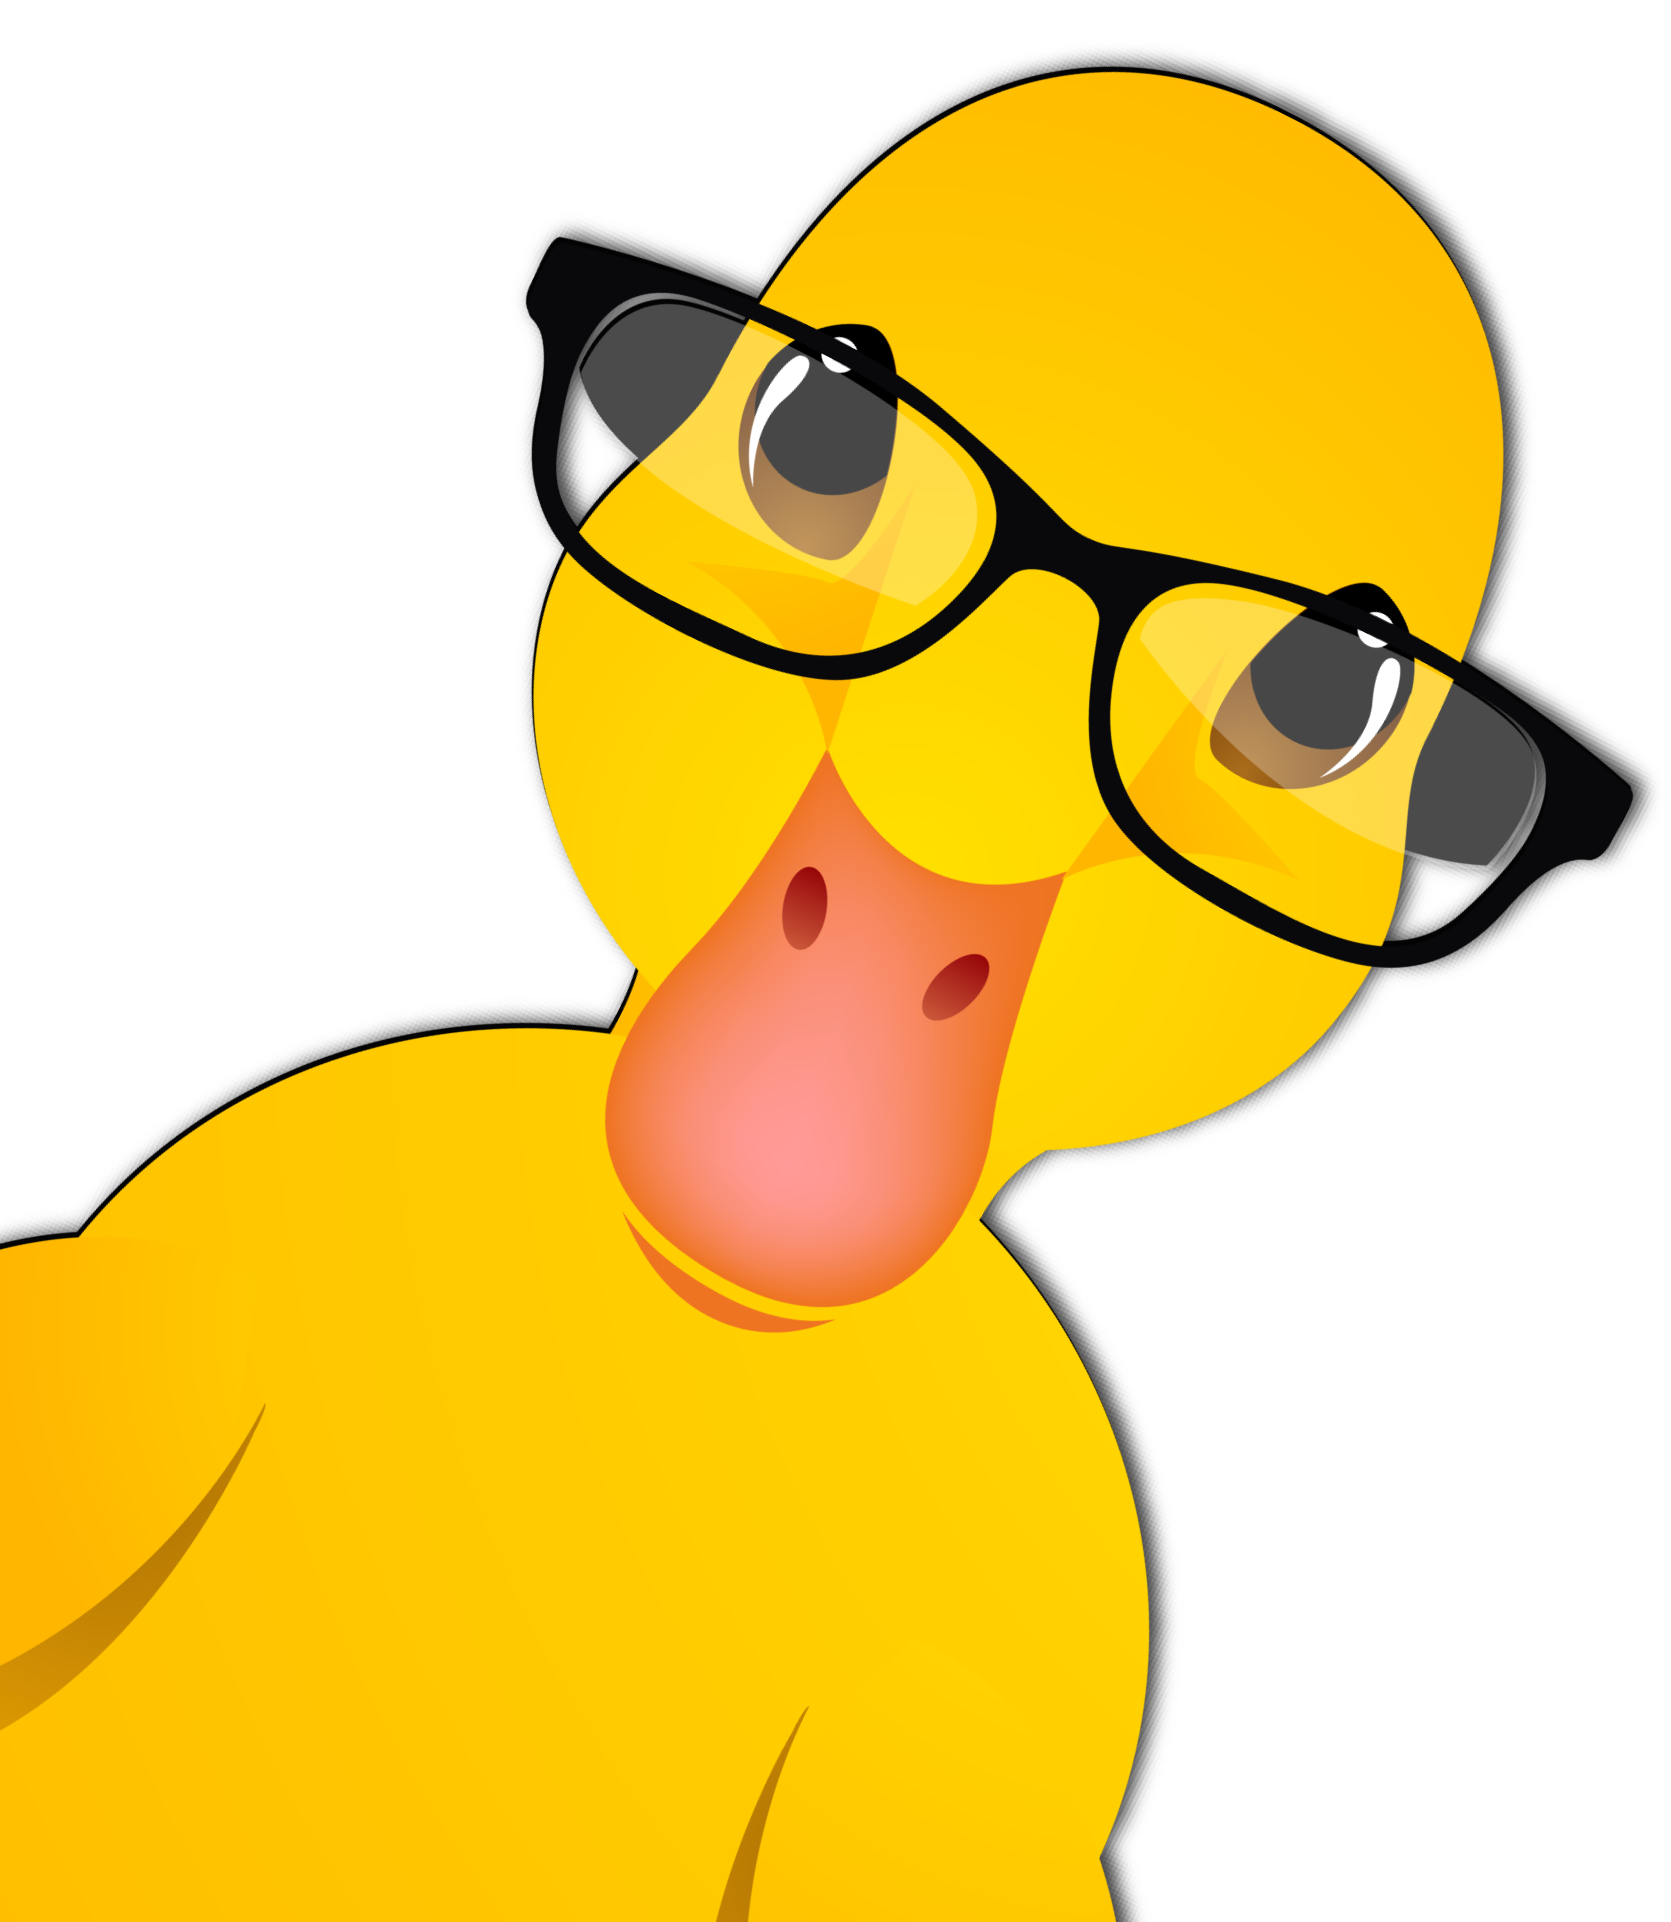 Duckling yellow thing free. Ducks clipart row